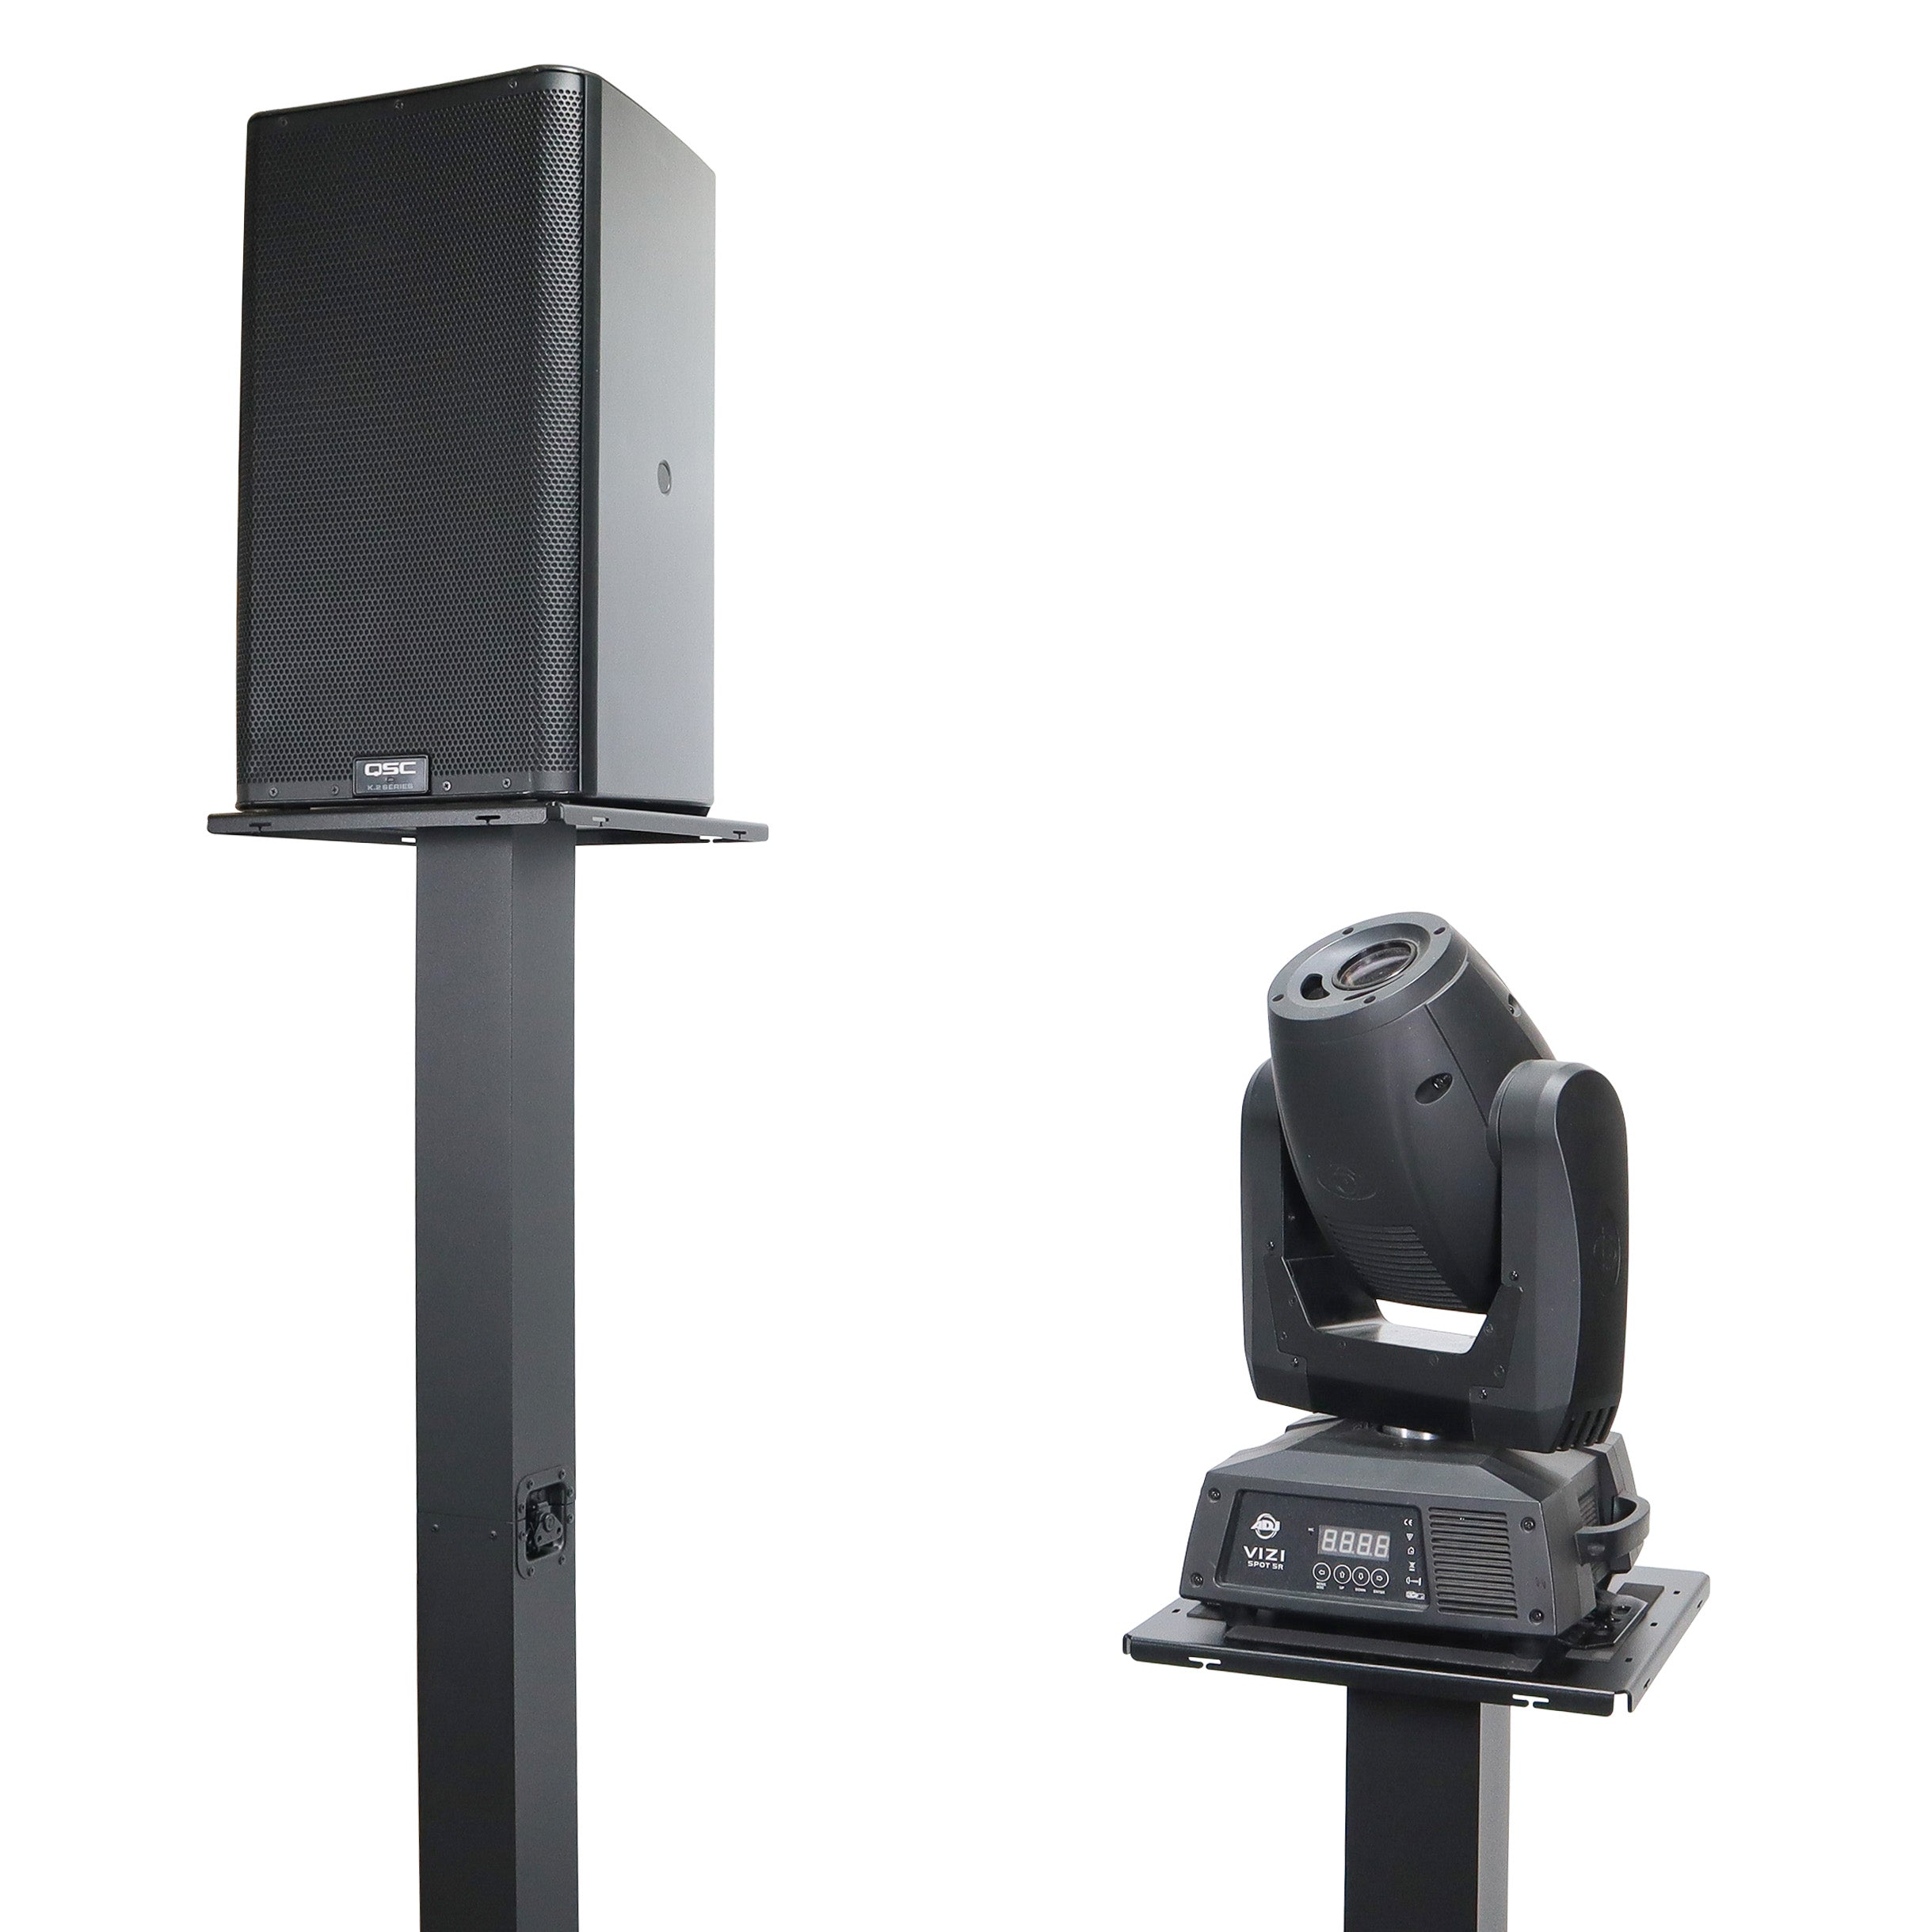 Pro X Pair of Moving Head or Lighting Speaker Totem DJ Stand with Carrying Bags by Humpter XFH-MHSTANDX2BL